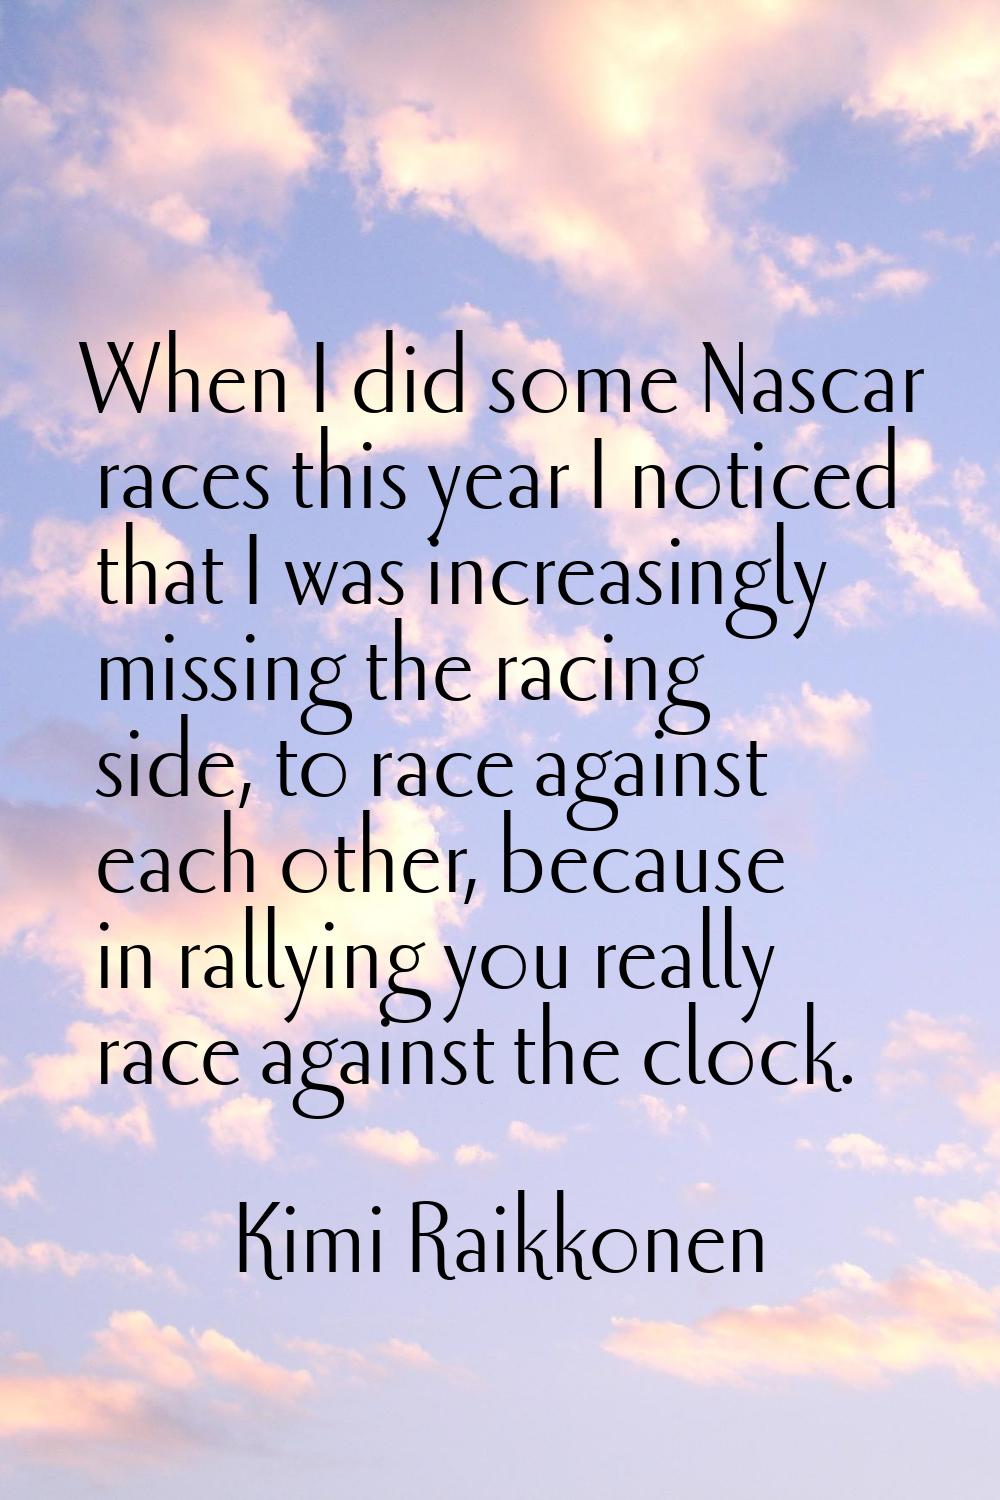 When I did some Nascar races this year I noticed that I was increasingly missing the racing side, t